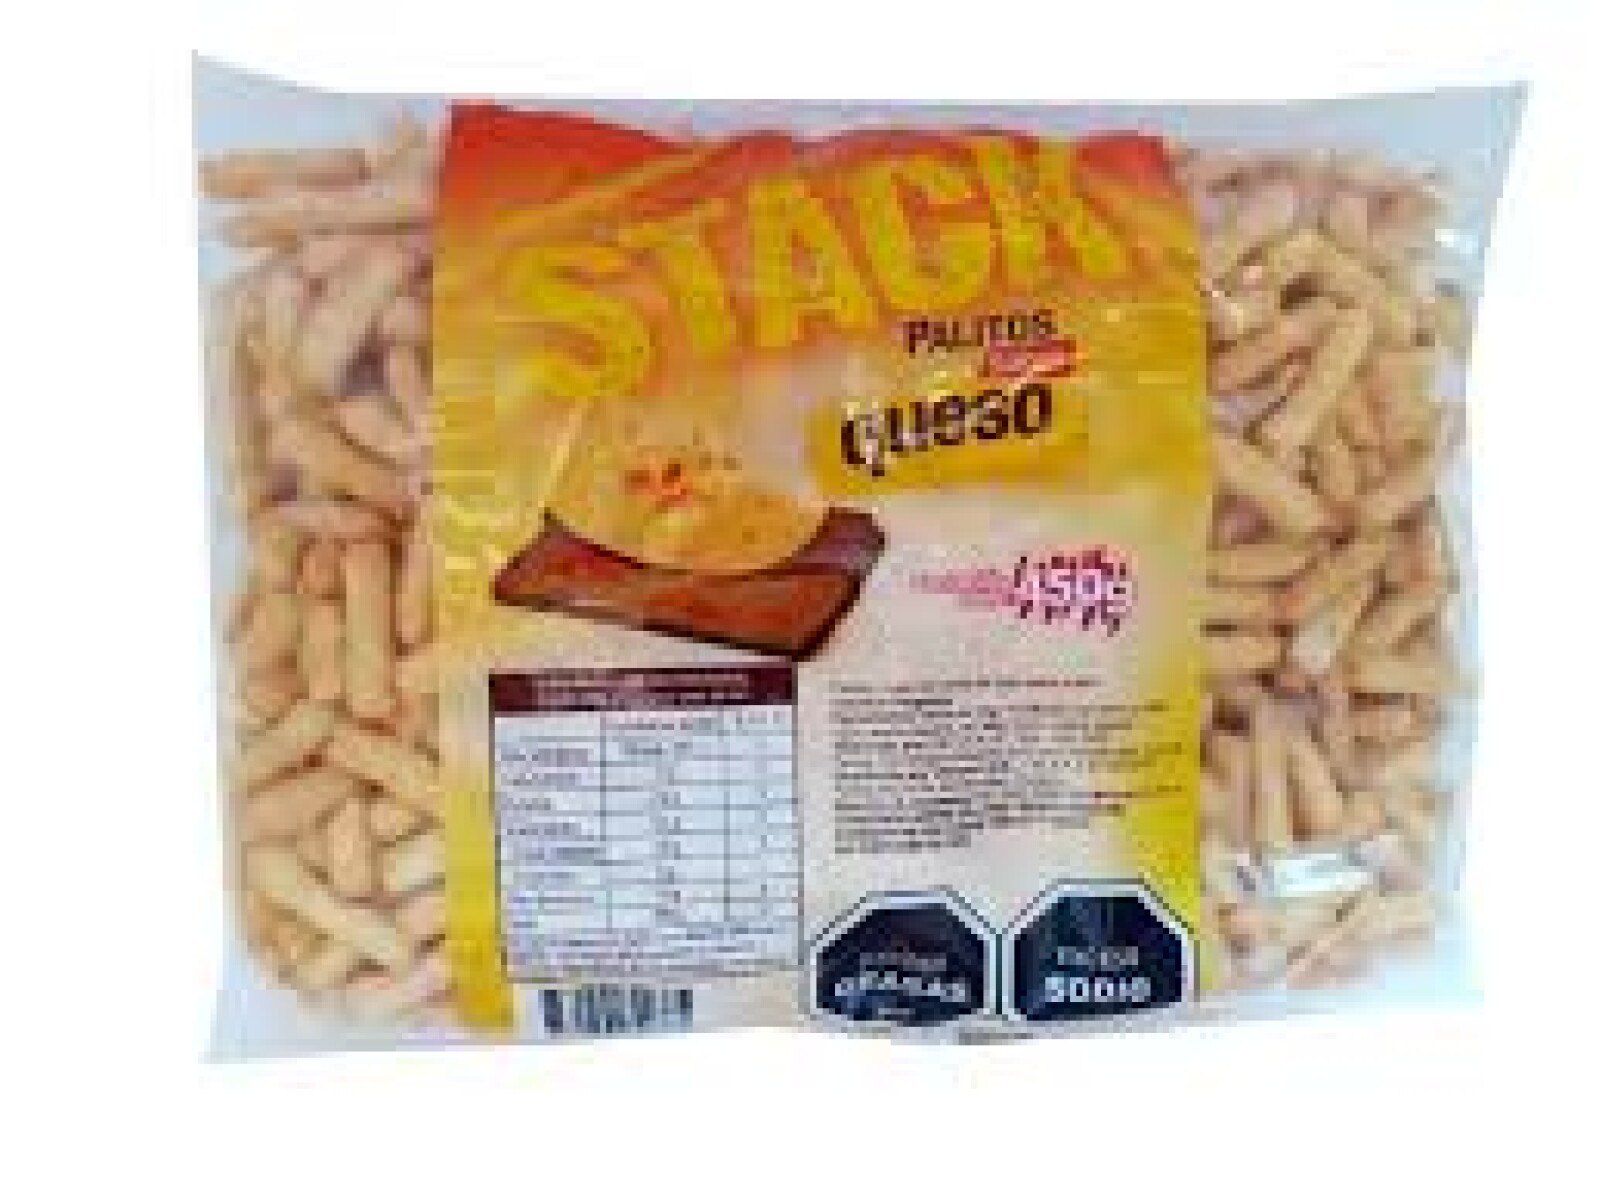 SNACK PALITOS STACK 450 QUESO 